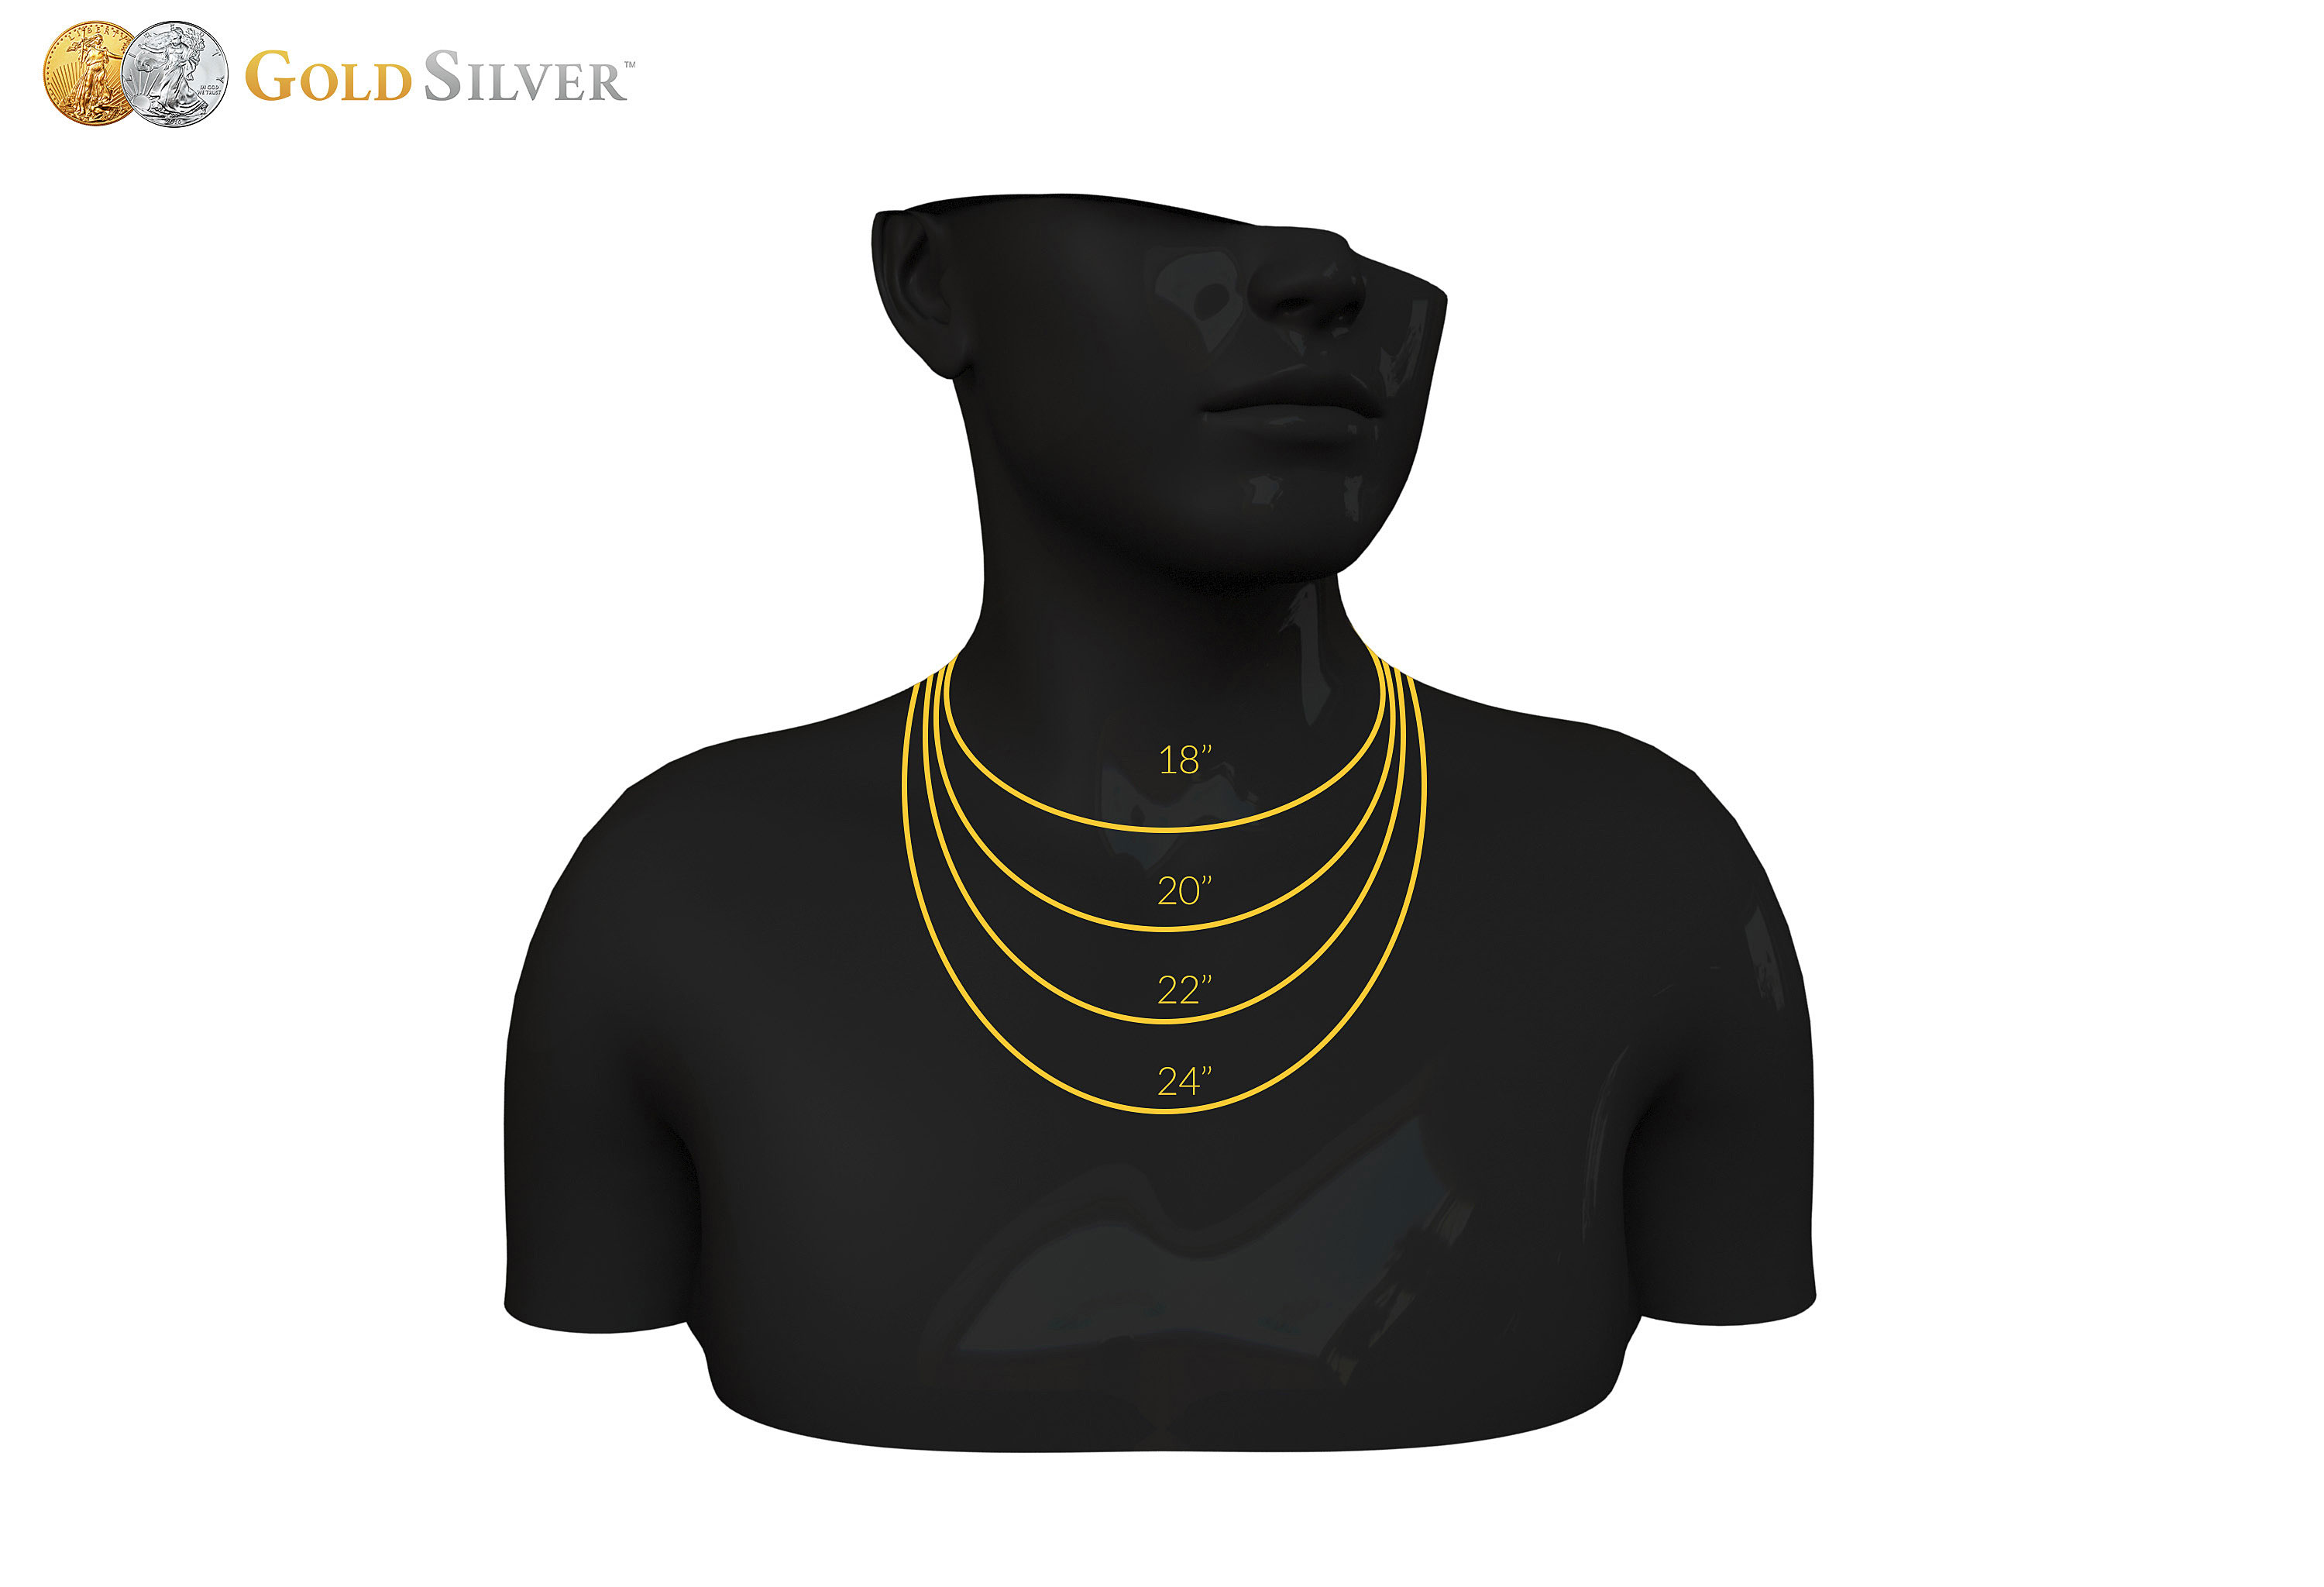 22K Prairie Gold Necklace (20” Length) - Buy Online at GoldSilver®